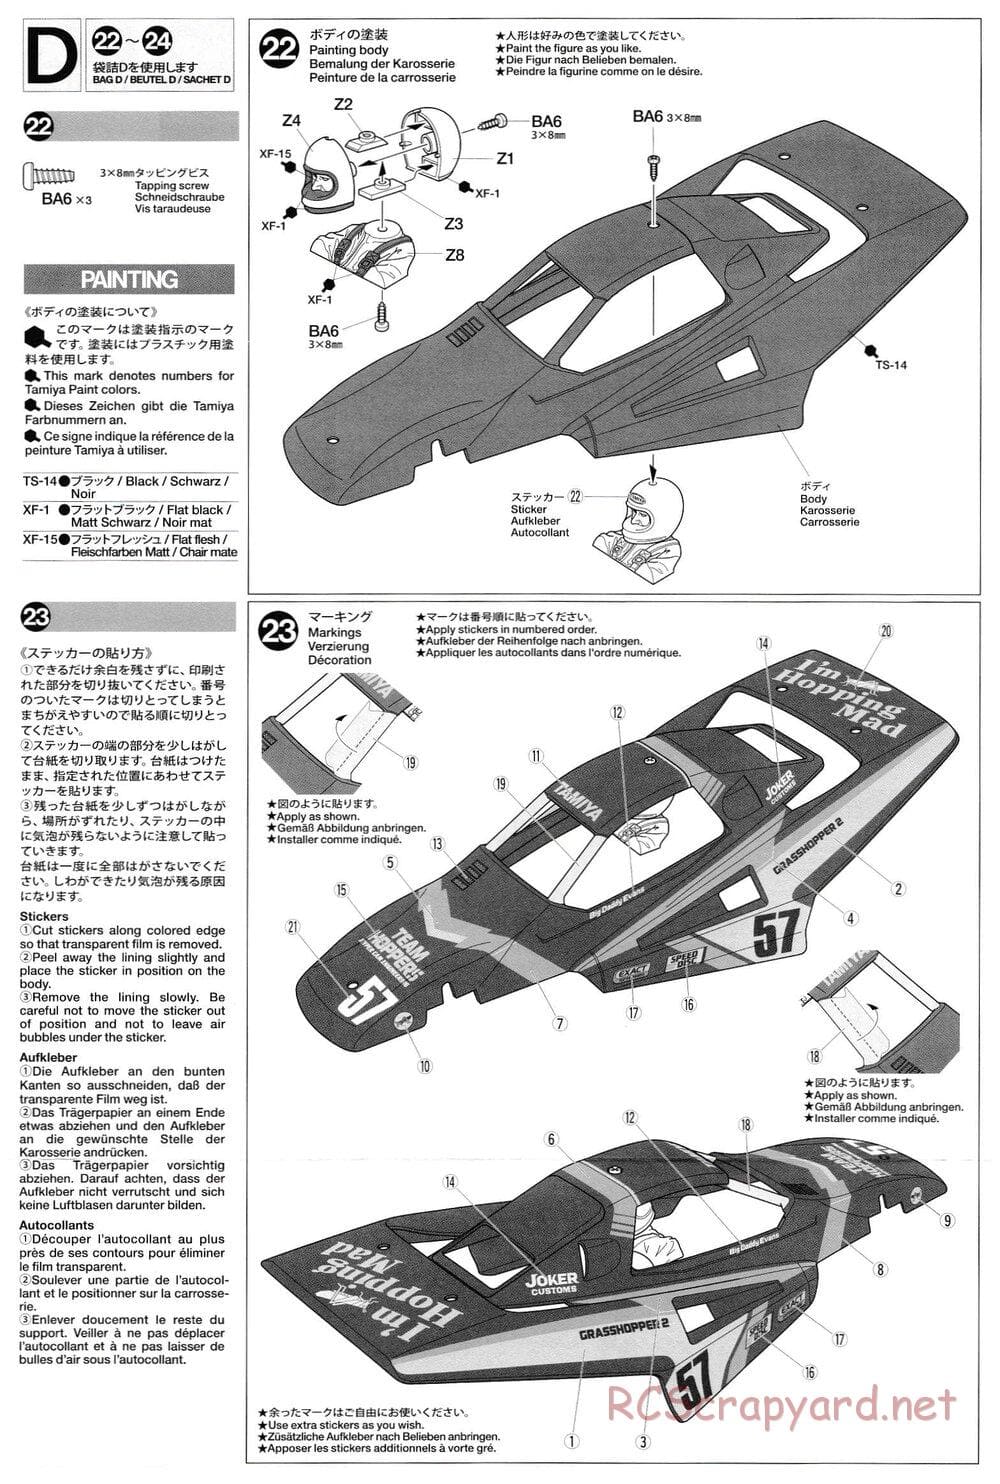 Tamiya - The Grasshopper II Black Edition Chassis - Manual - Page 4